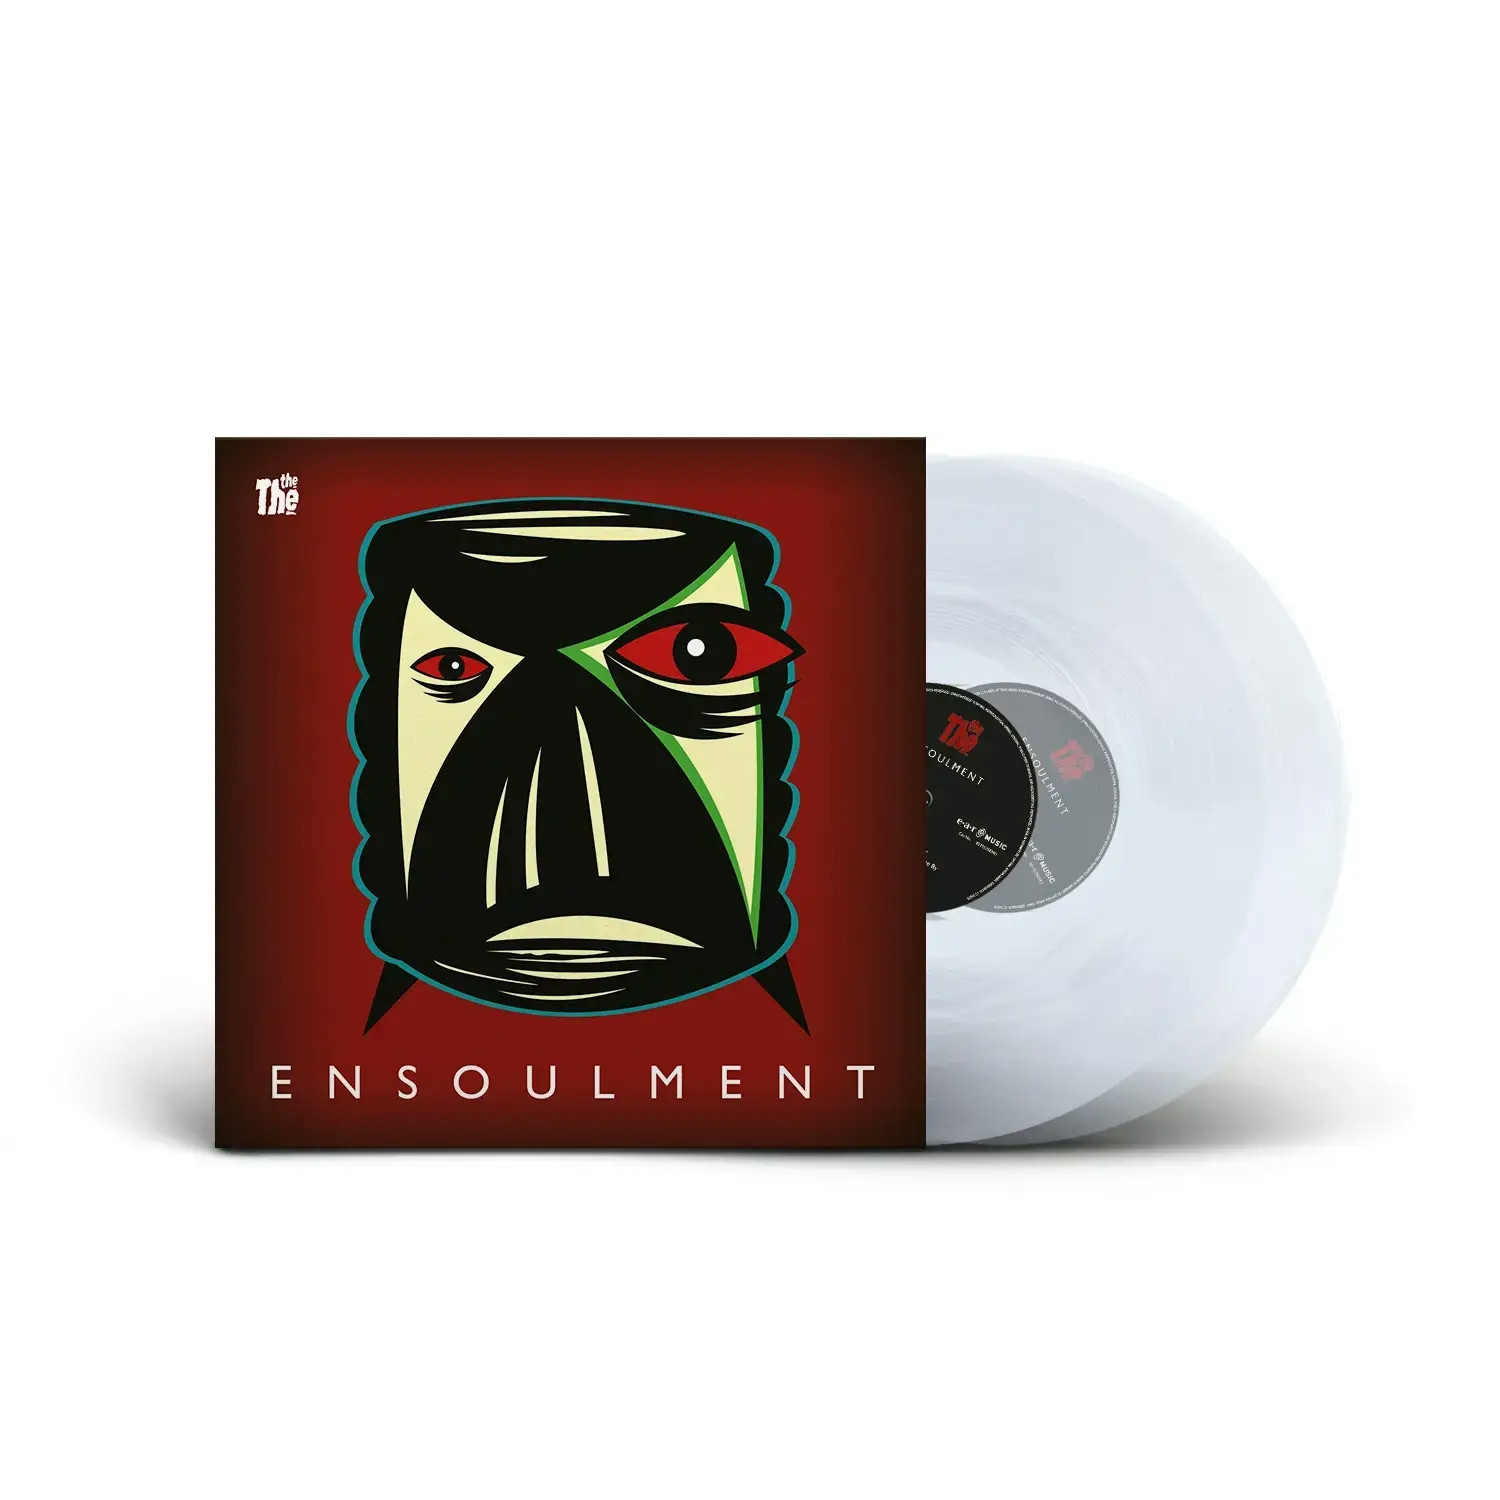 Album artwork for Album artwork for Ensoulment by The The by Ensoulment - The The